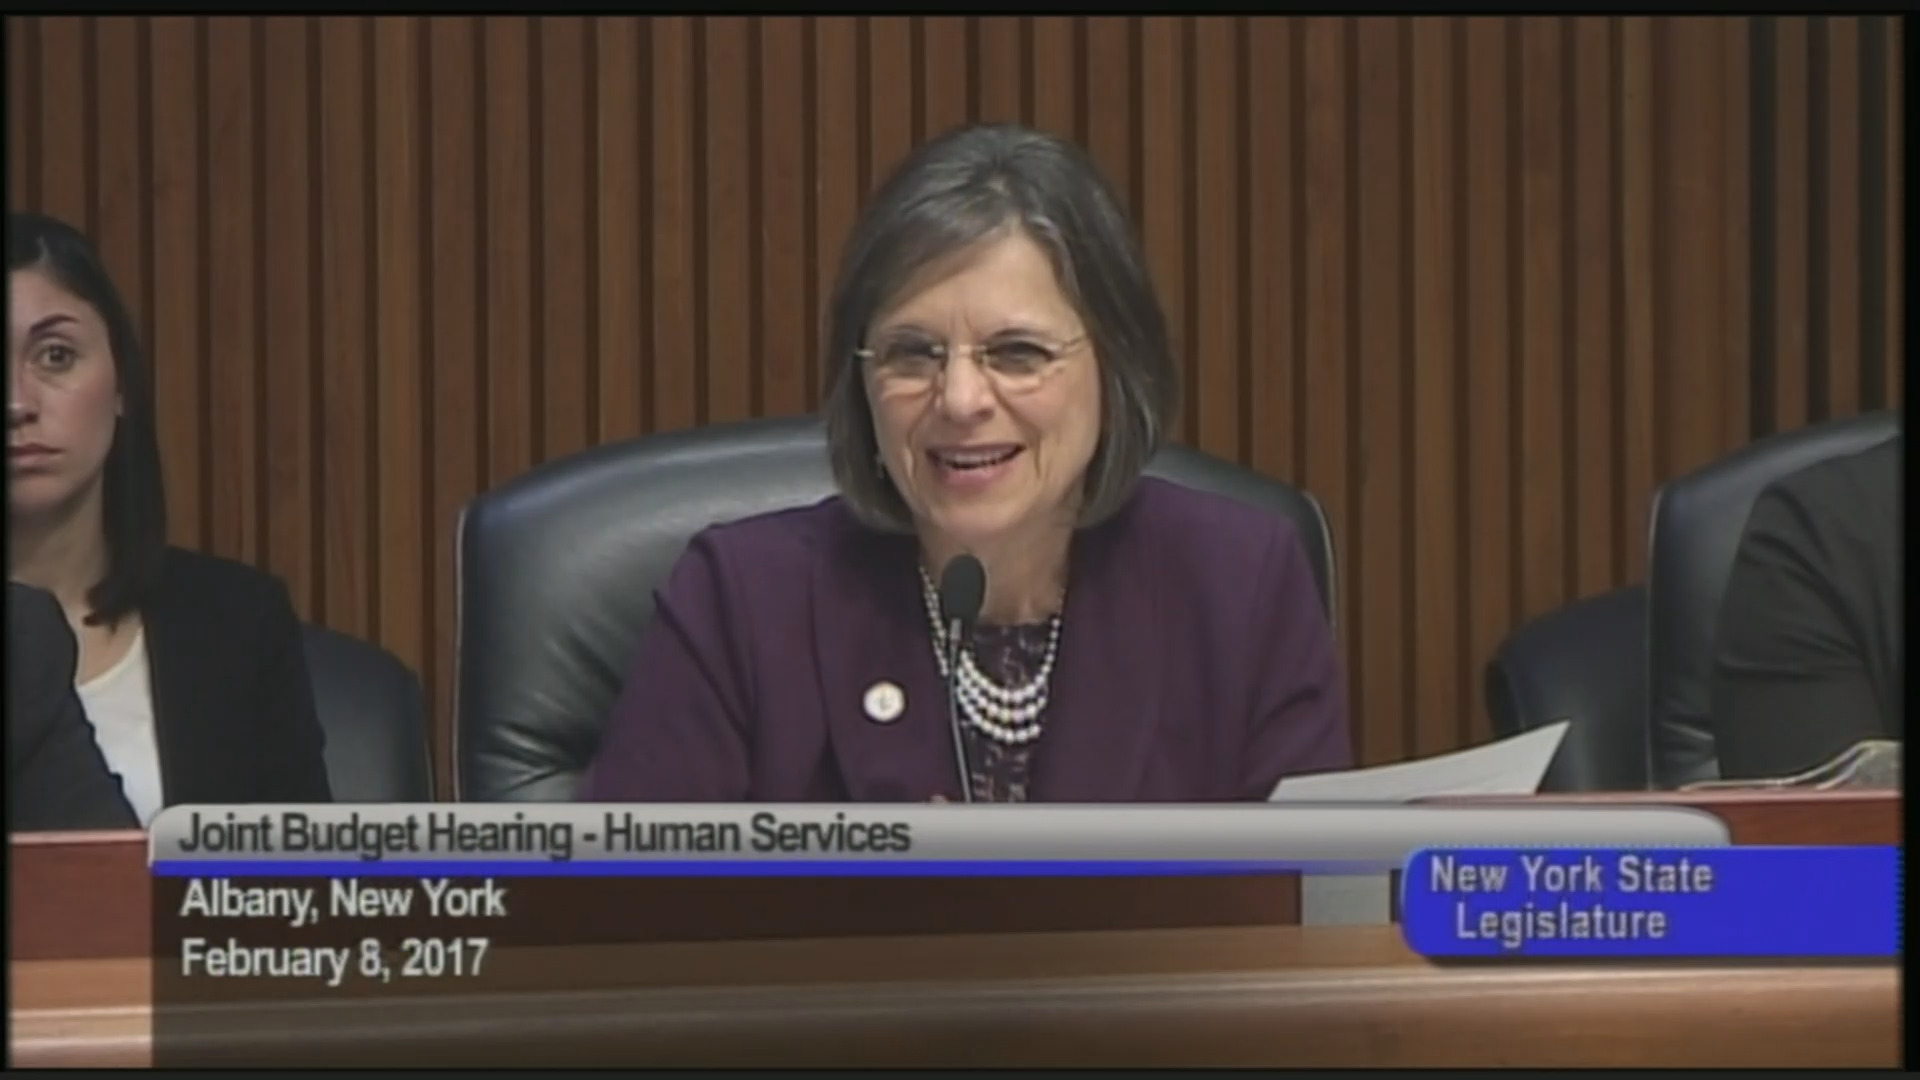 Joint Budget Hearing on Funding for Human Services